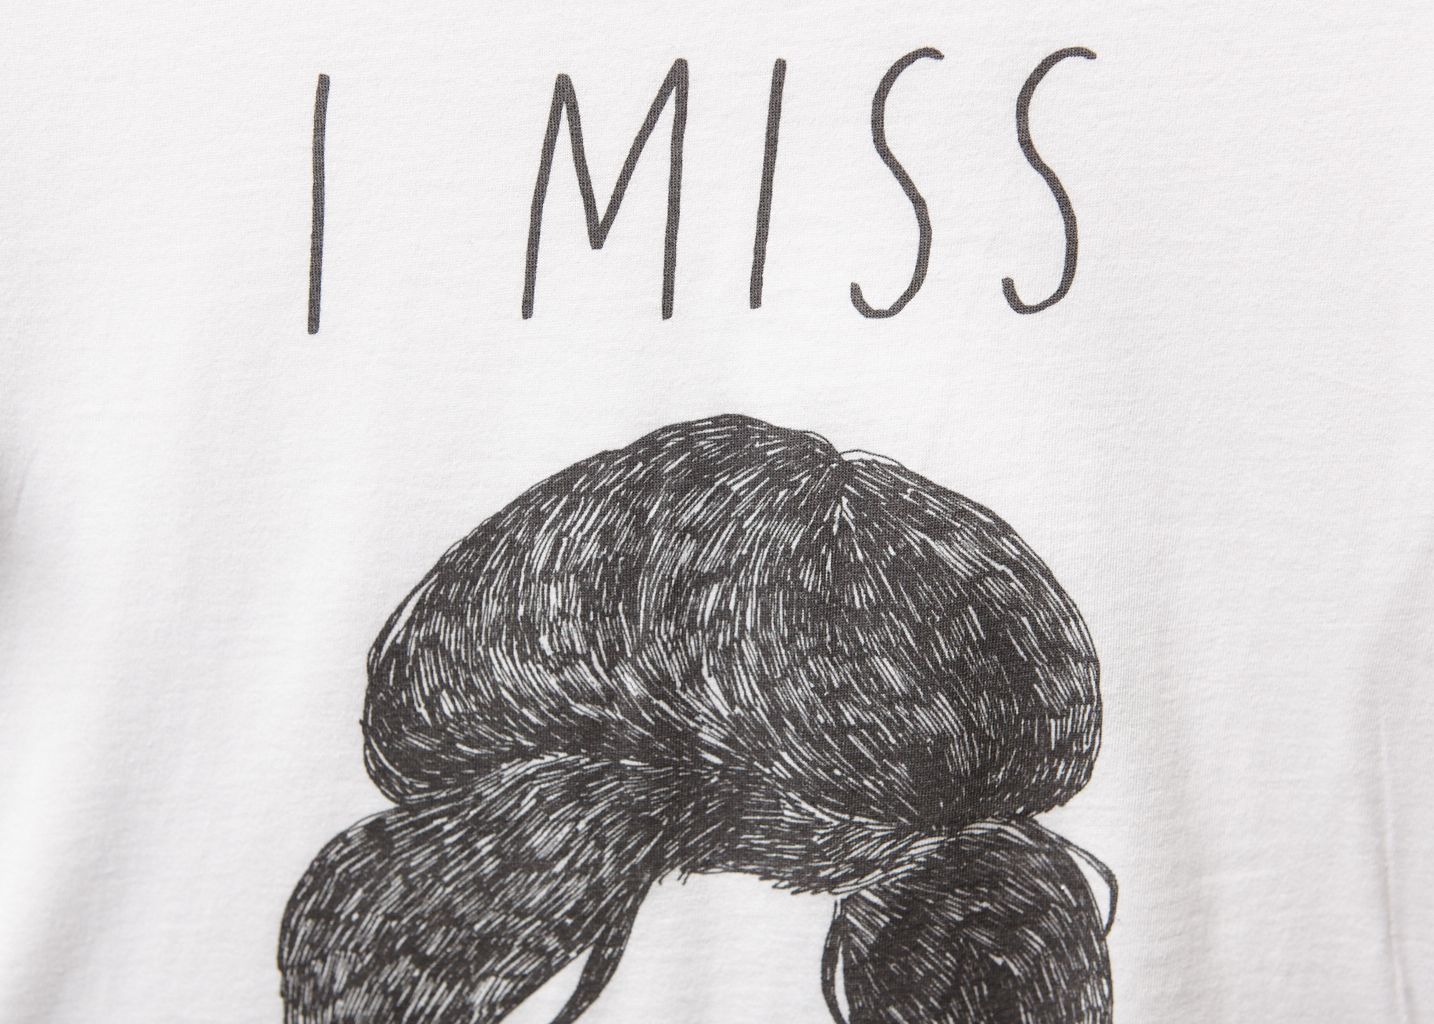 Tshirt I Miss Amy Winehouse - Unseven